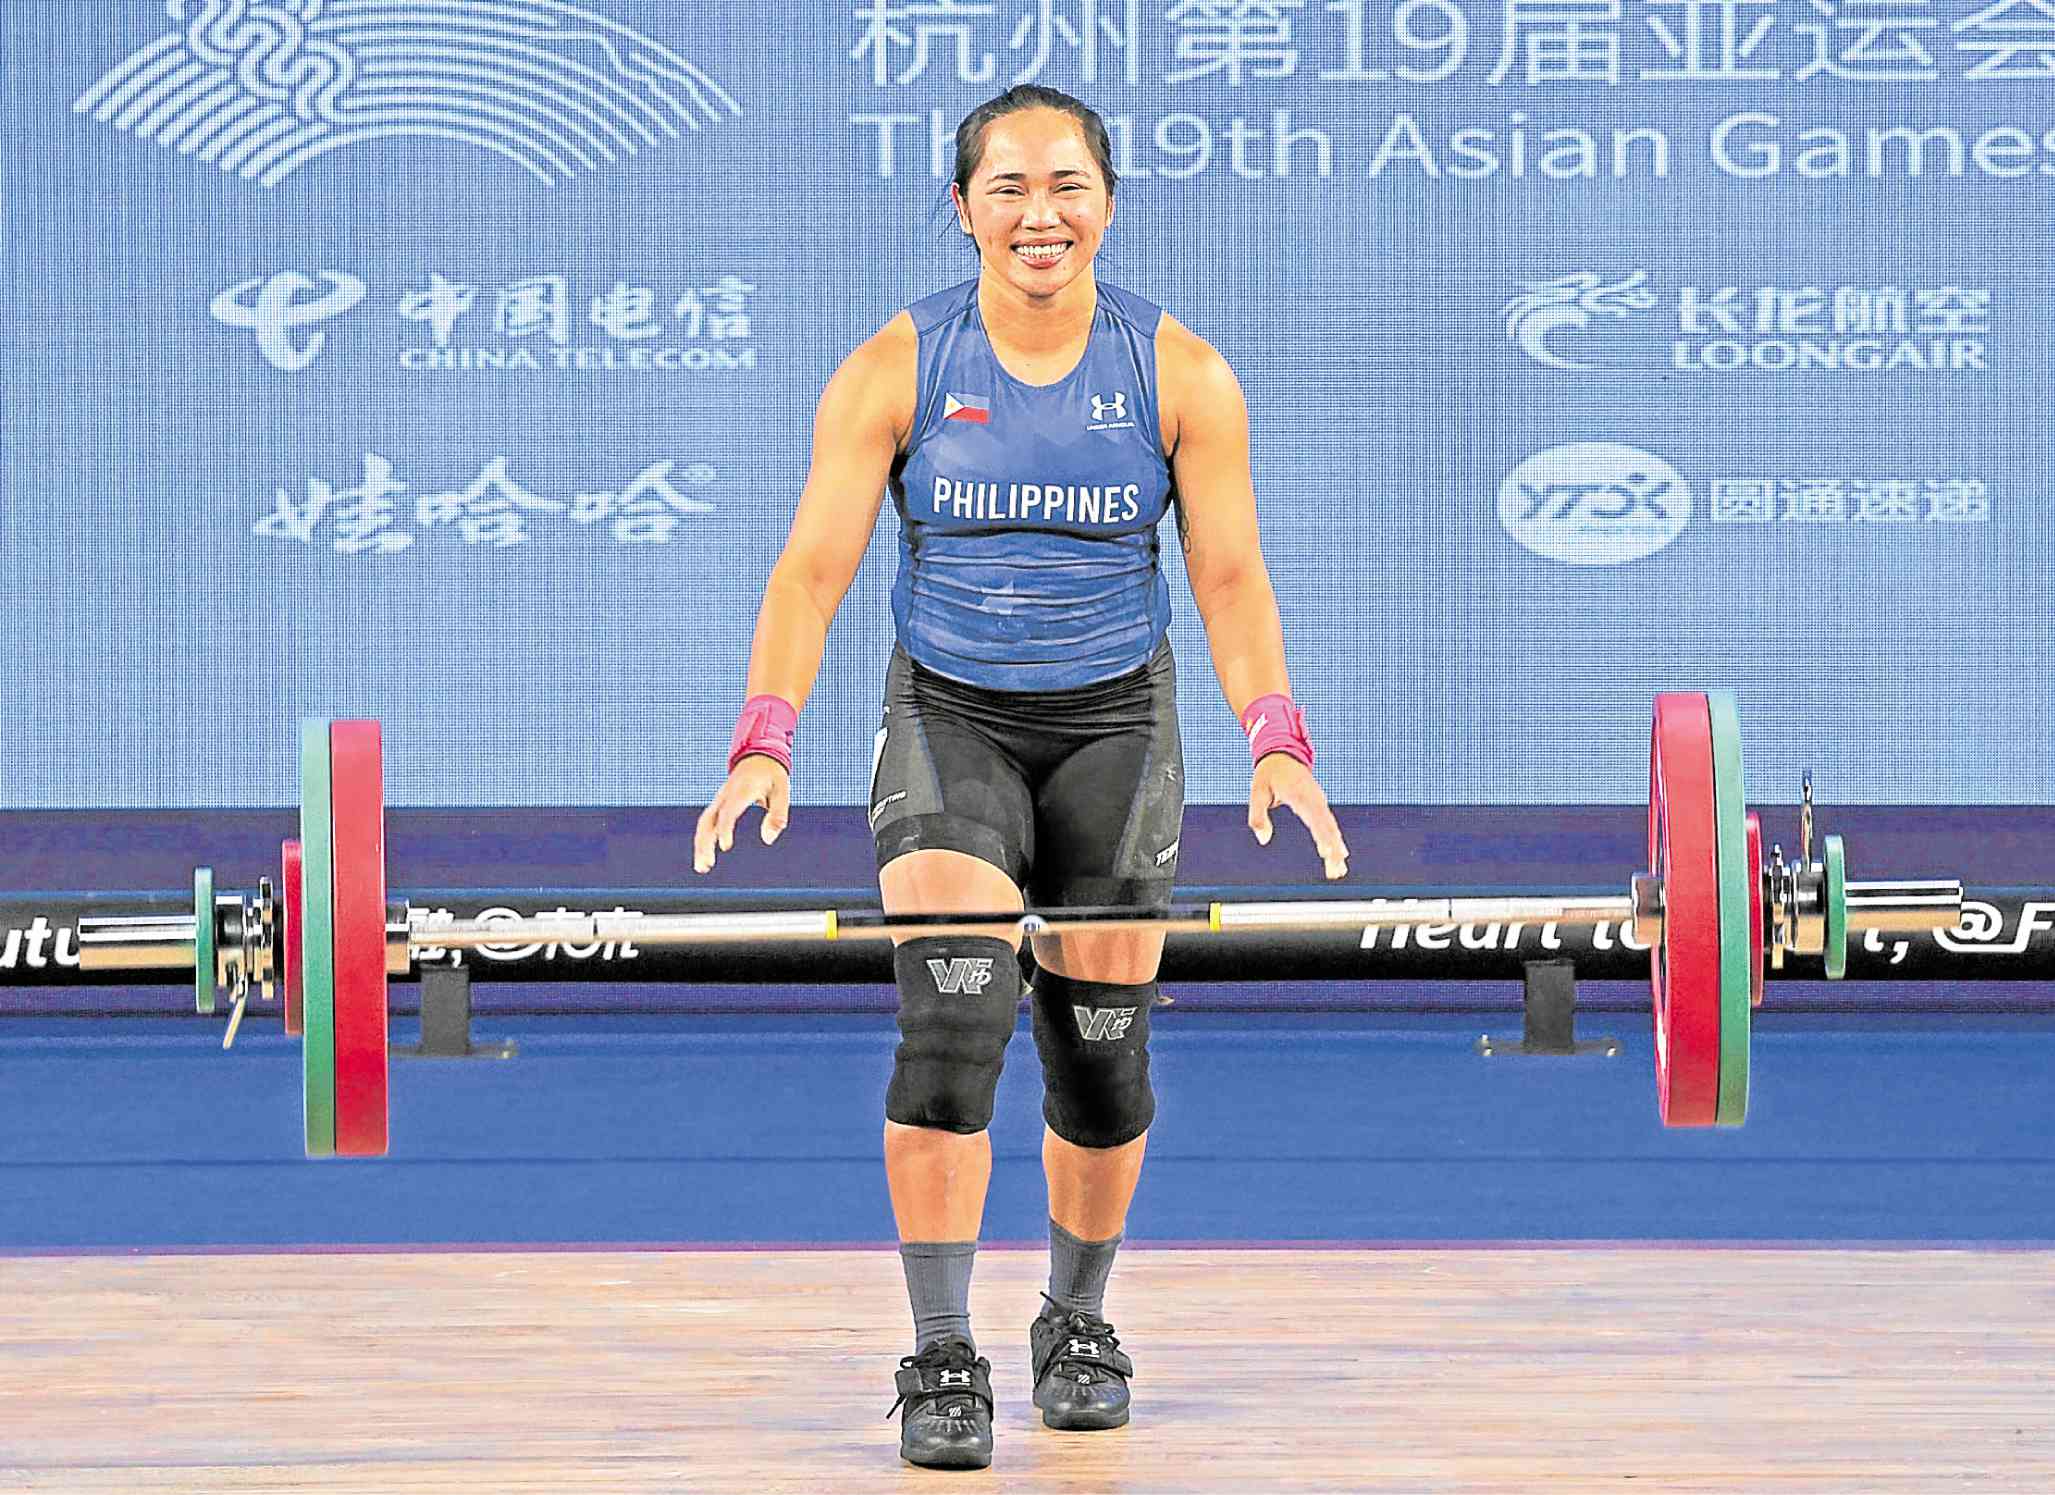 Ending out of the rostrum, Diaz-Naranjo picks up priceless insights for her Olympic journey